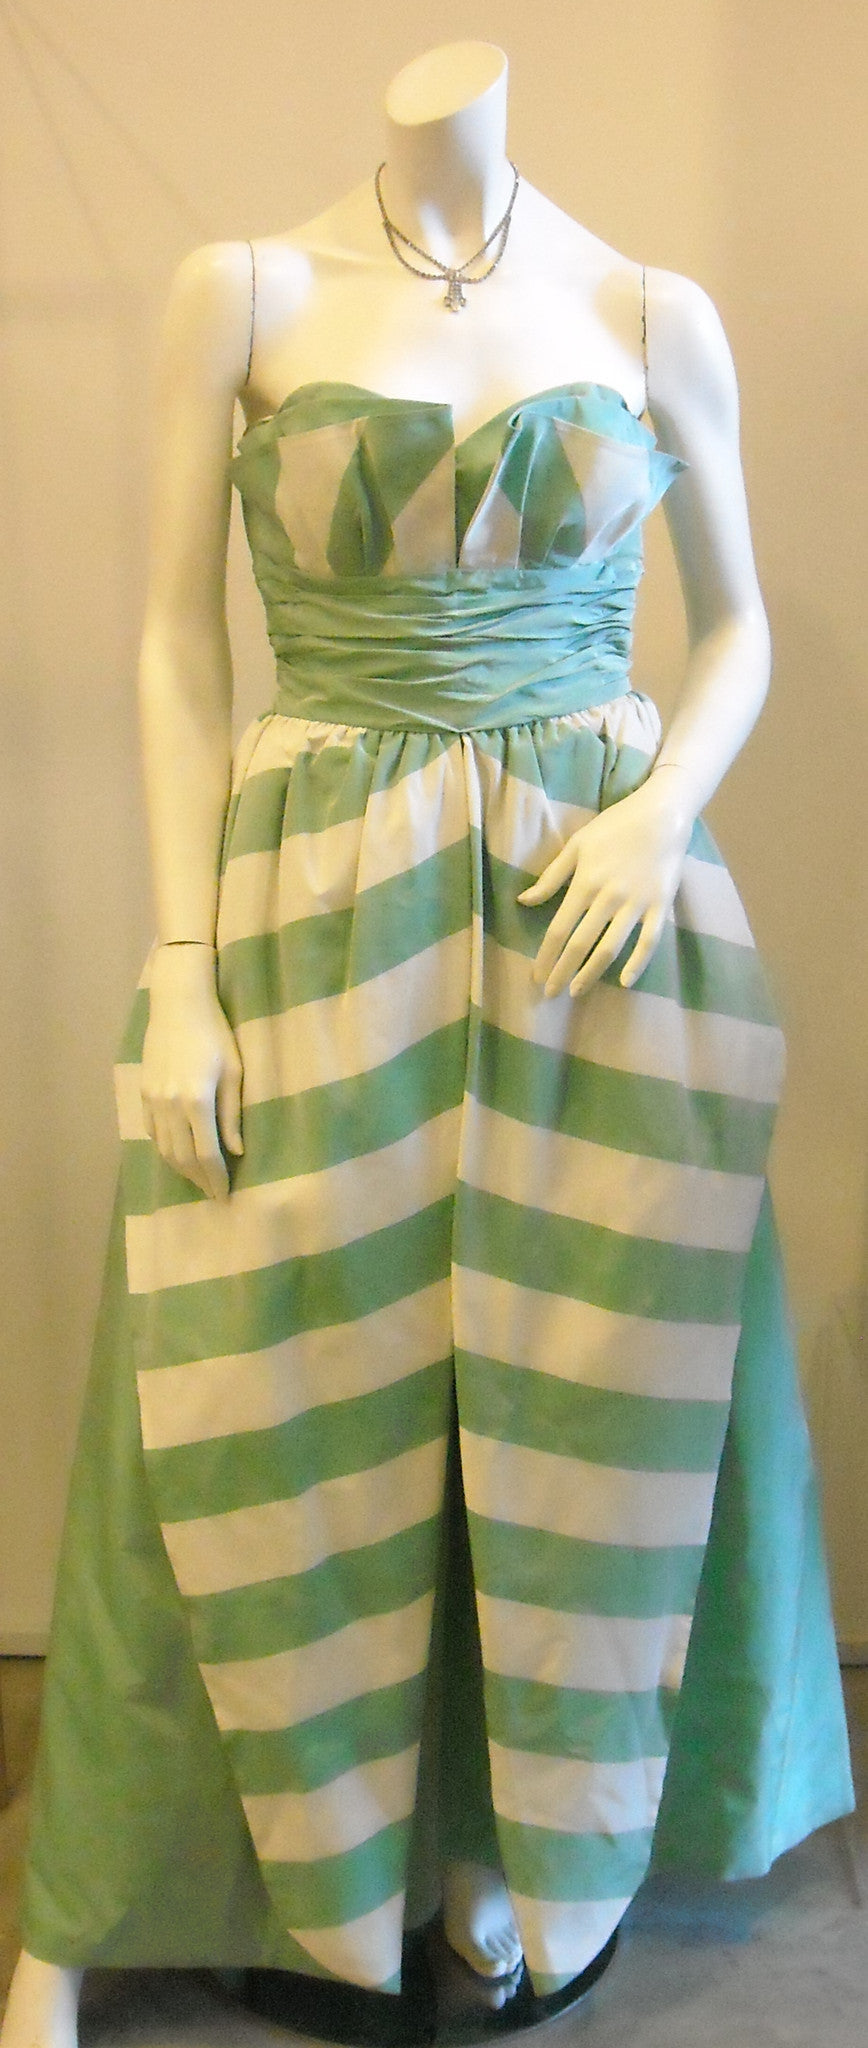 Making An Entrance with Green Stripes Vintage Evening Dress